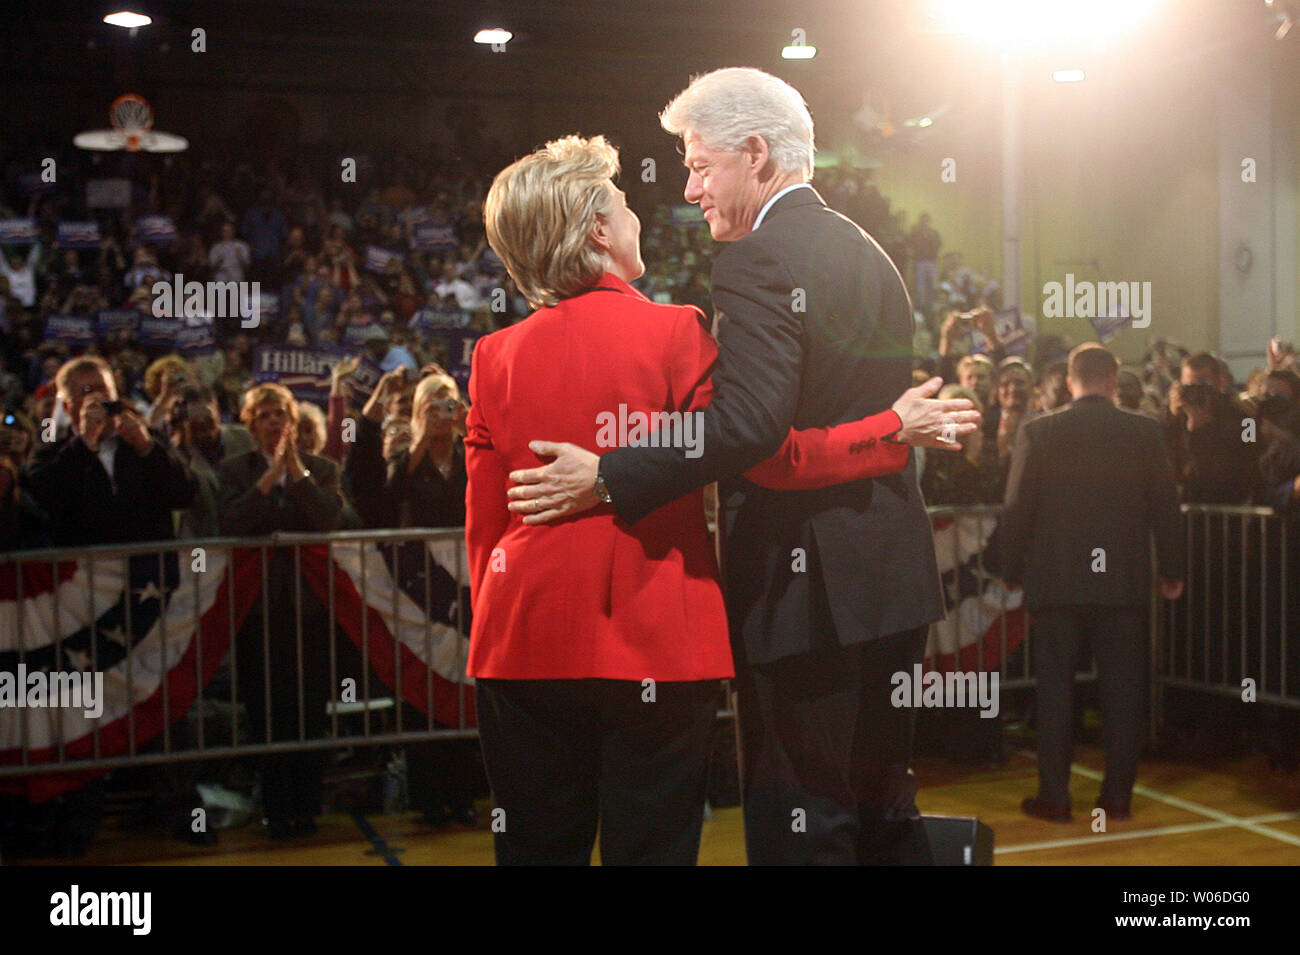 Democratic presidential hopeful Sen. Hillary Clinton (D-NY) embraces with husband former U.S. President Bill Clinton during a campaign stop at McClure North High School in Florissant, Missouri on January 19, 2008. (UPI Photo/Bill Greenblatt) Stock Photo